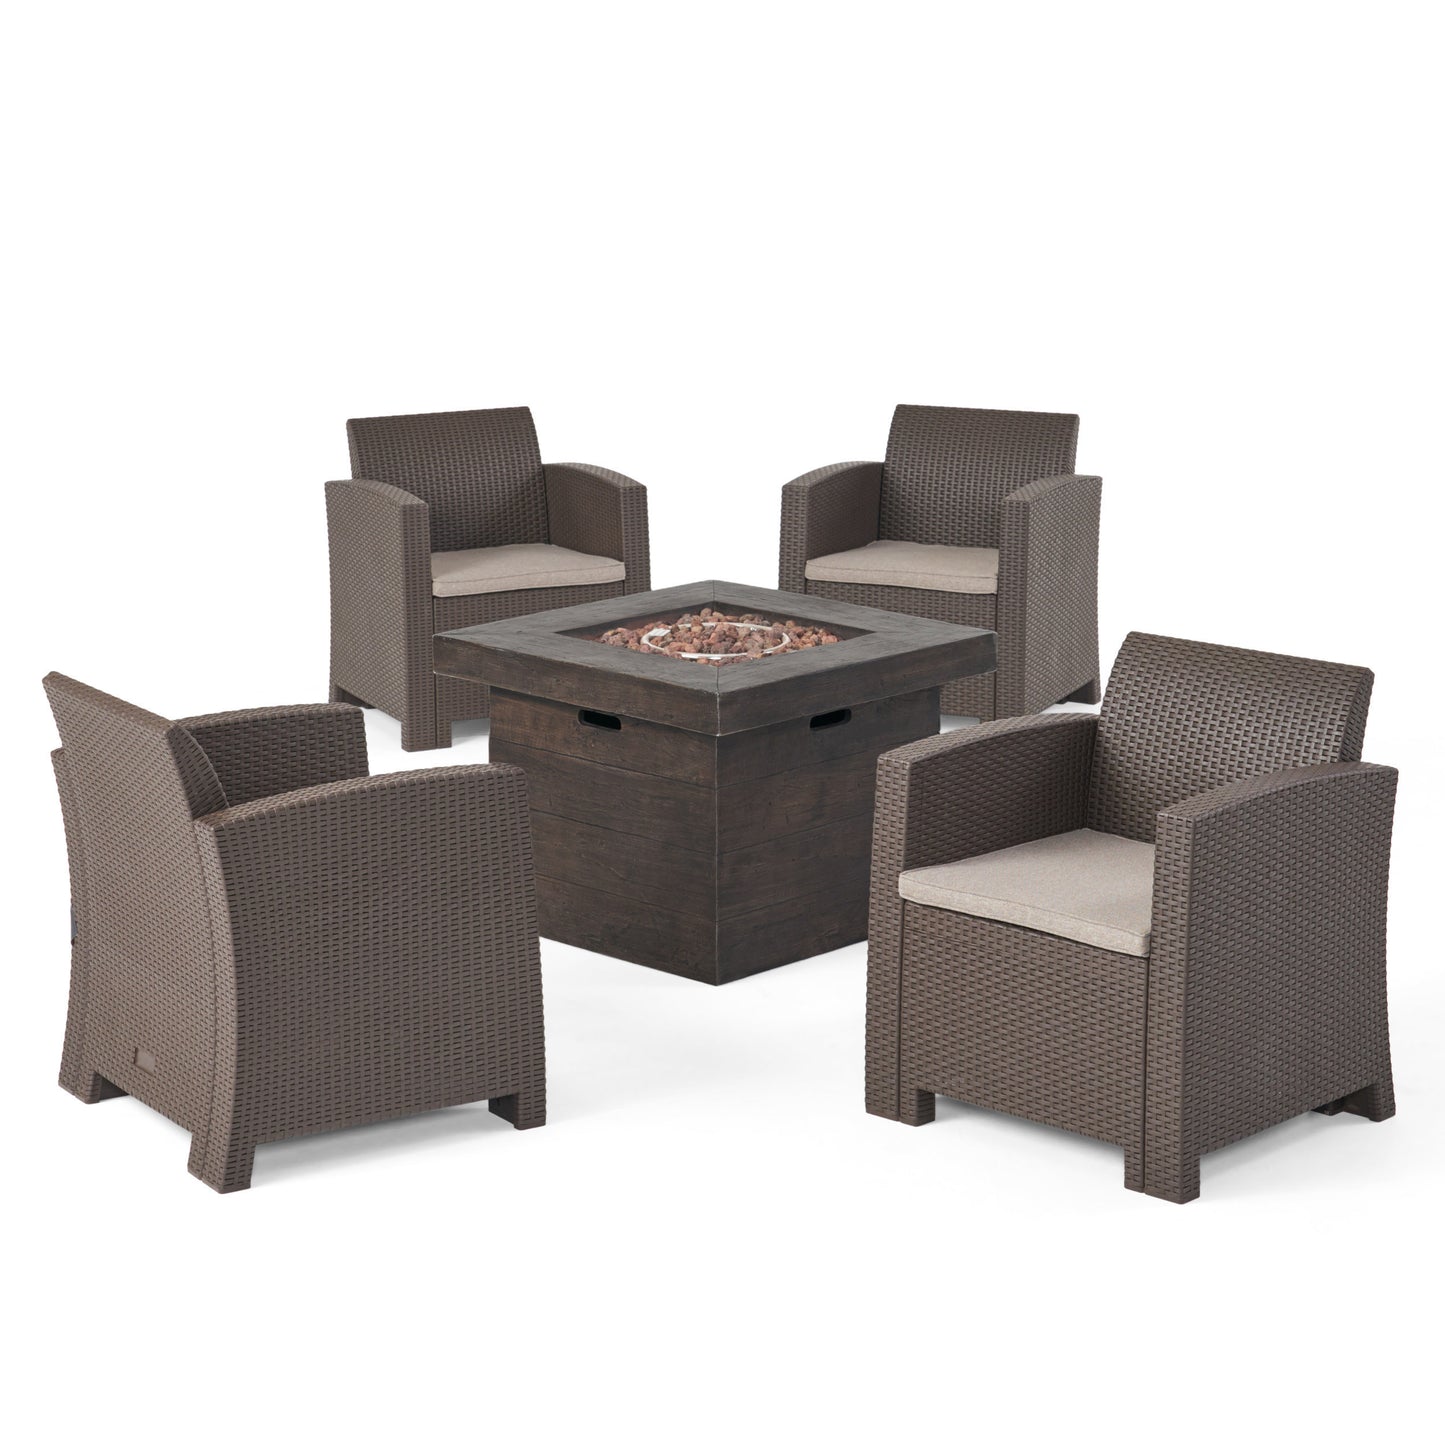 Ollie Outdoor 4-Seater Wicker Print Club Chat Chair Set with Fire Pit